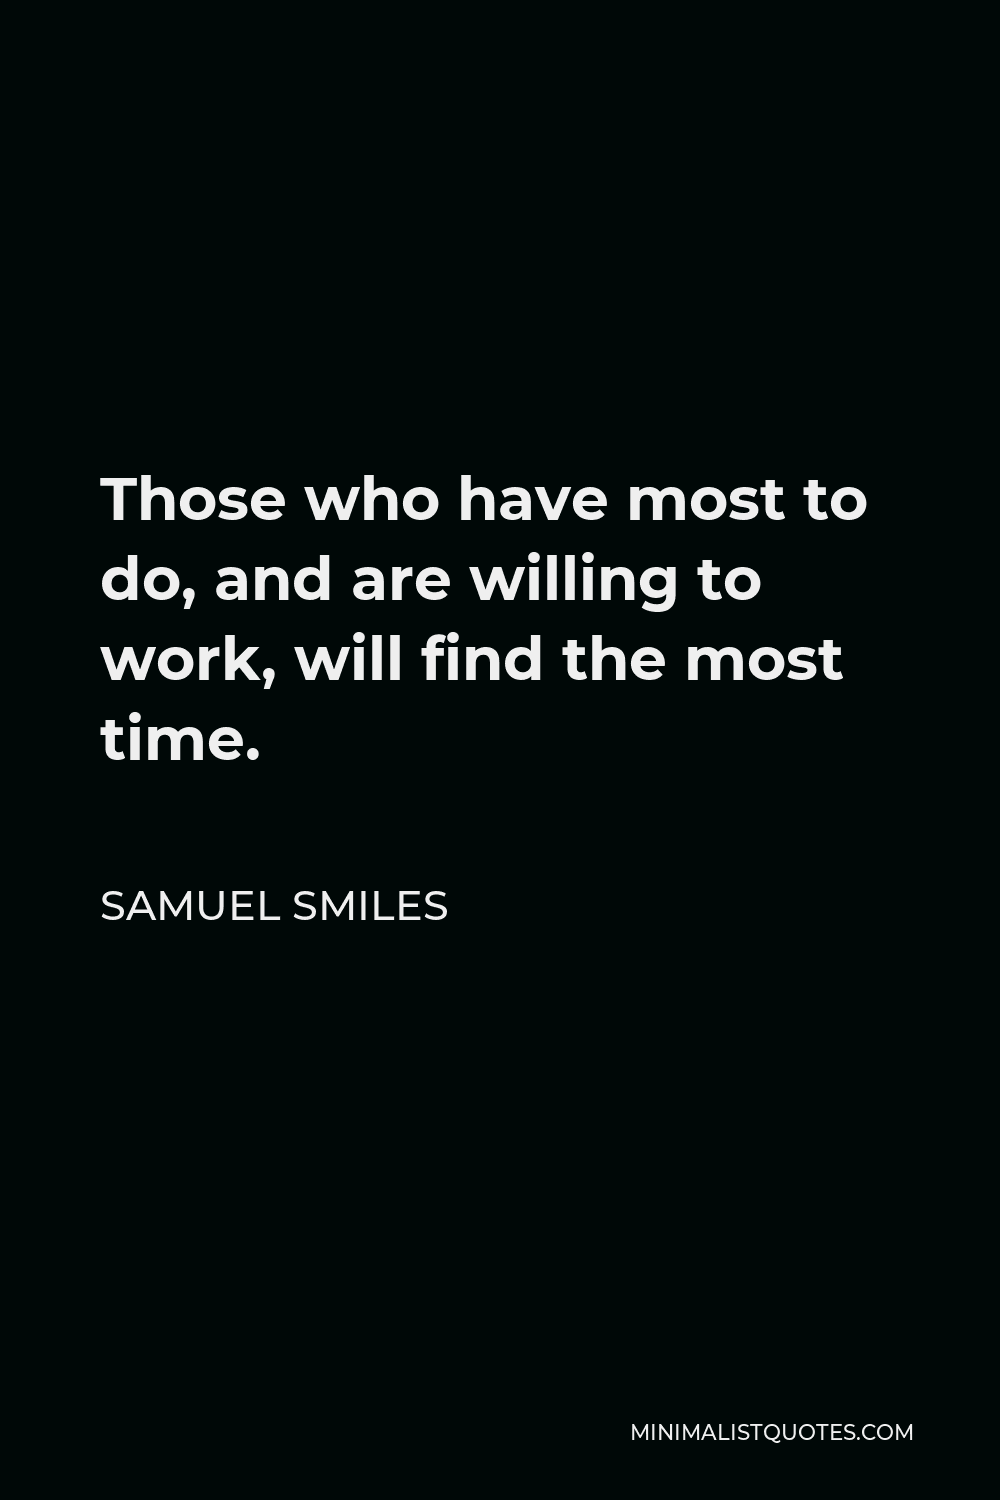 Samuel Smiles Quote - Those who have most to do, and are willing to work, will find the most time.